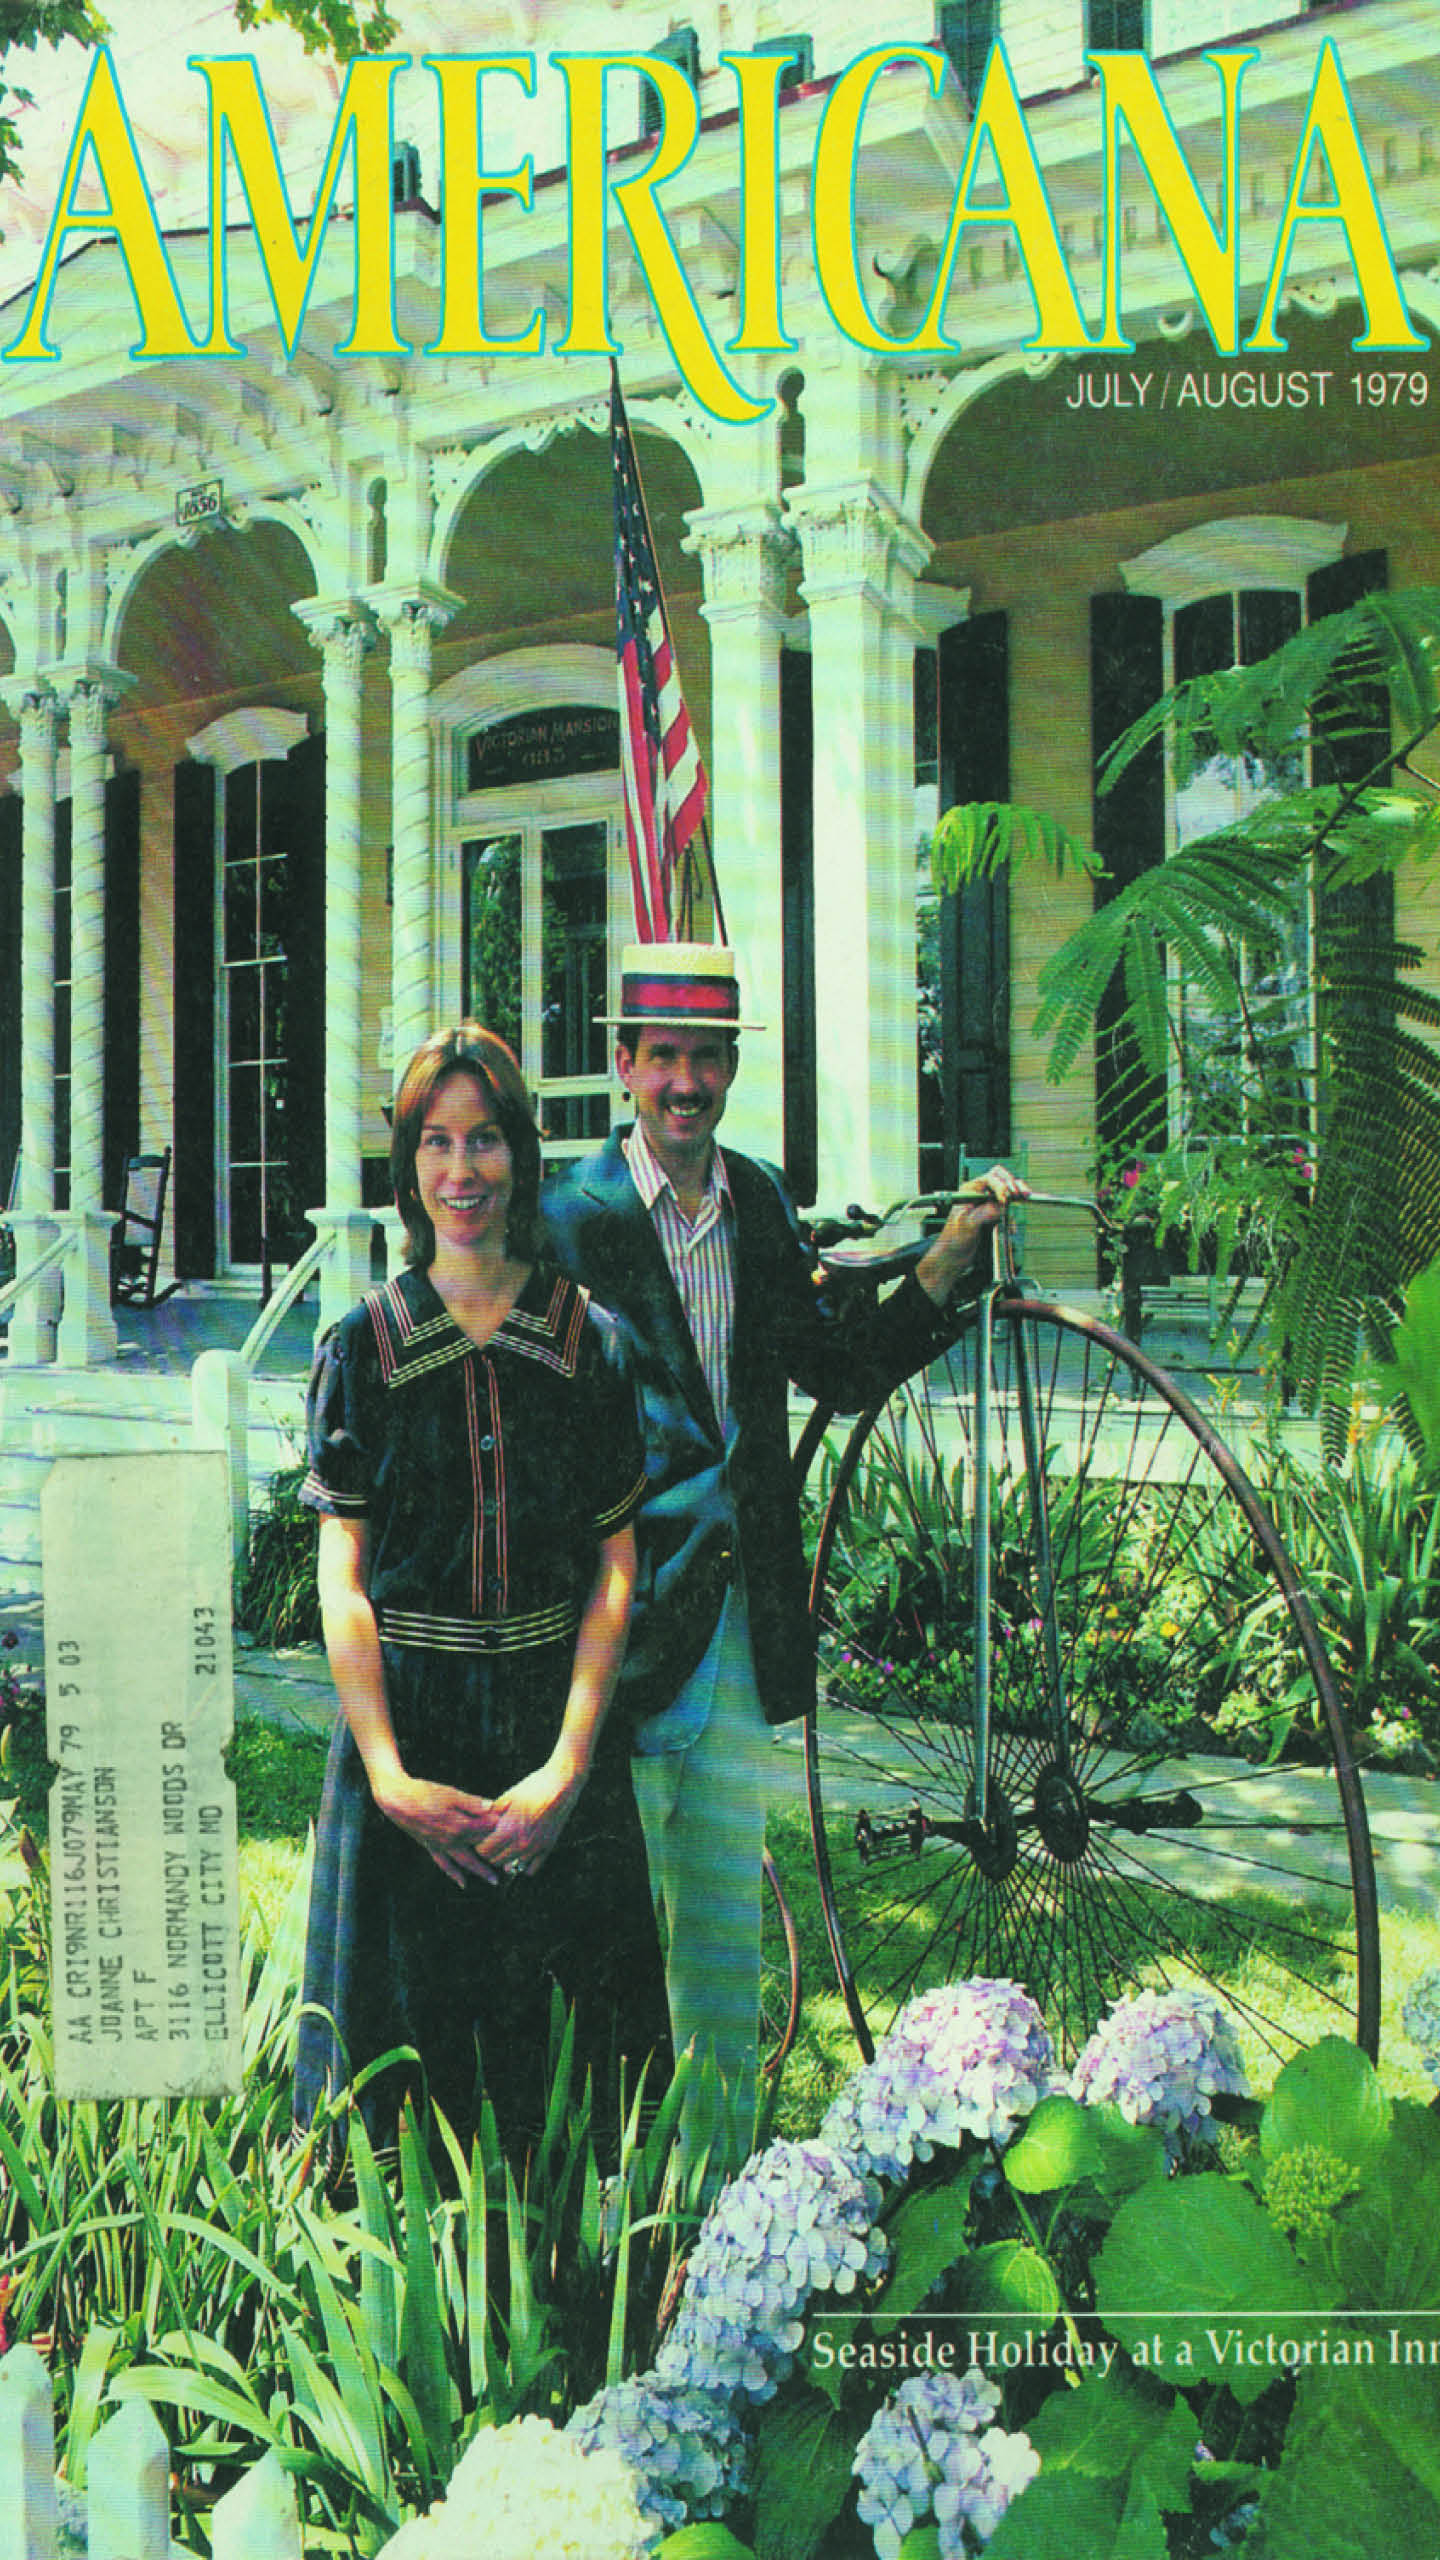 A historic picture of a man and woman standing in front of a Victorian style building. 